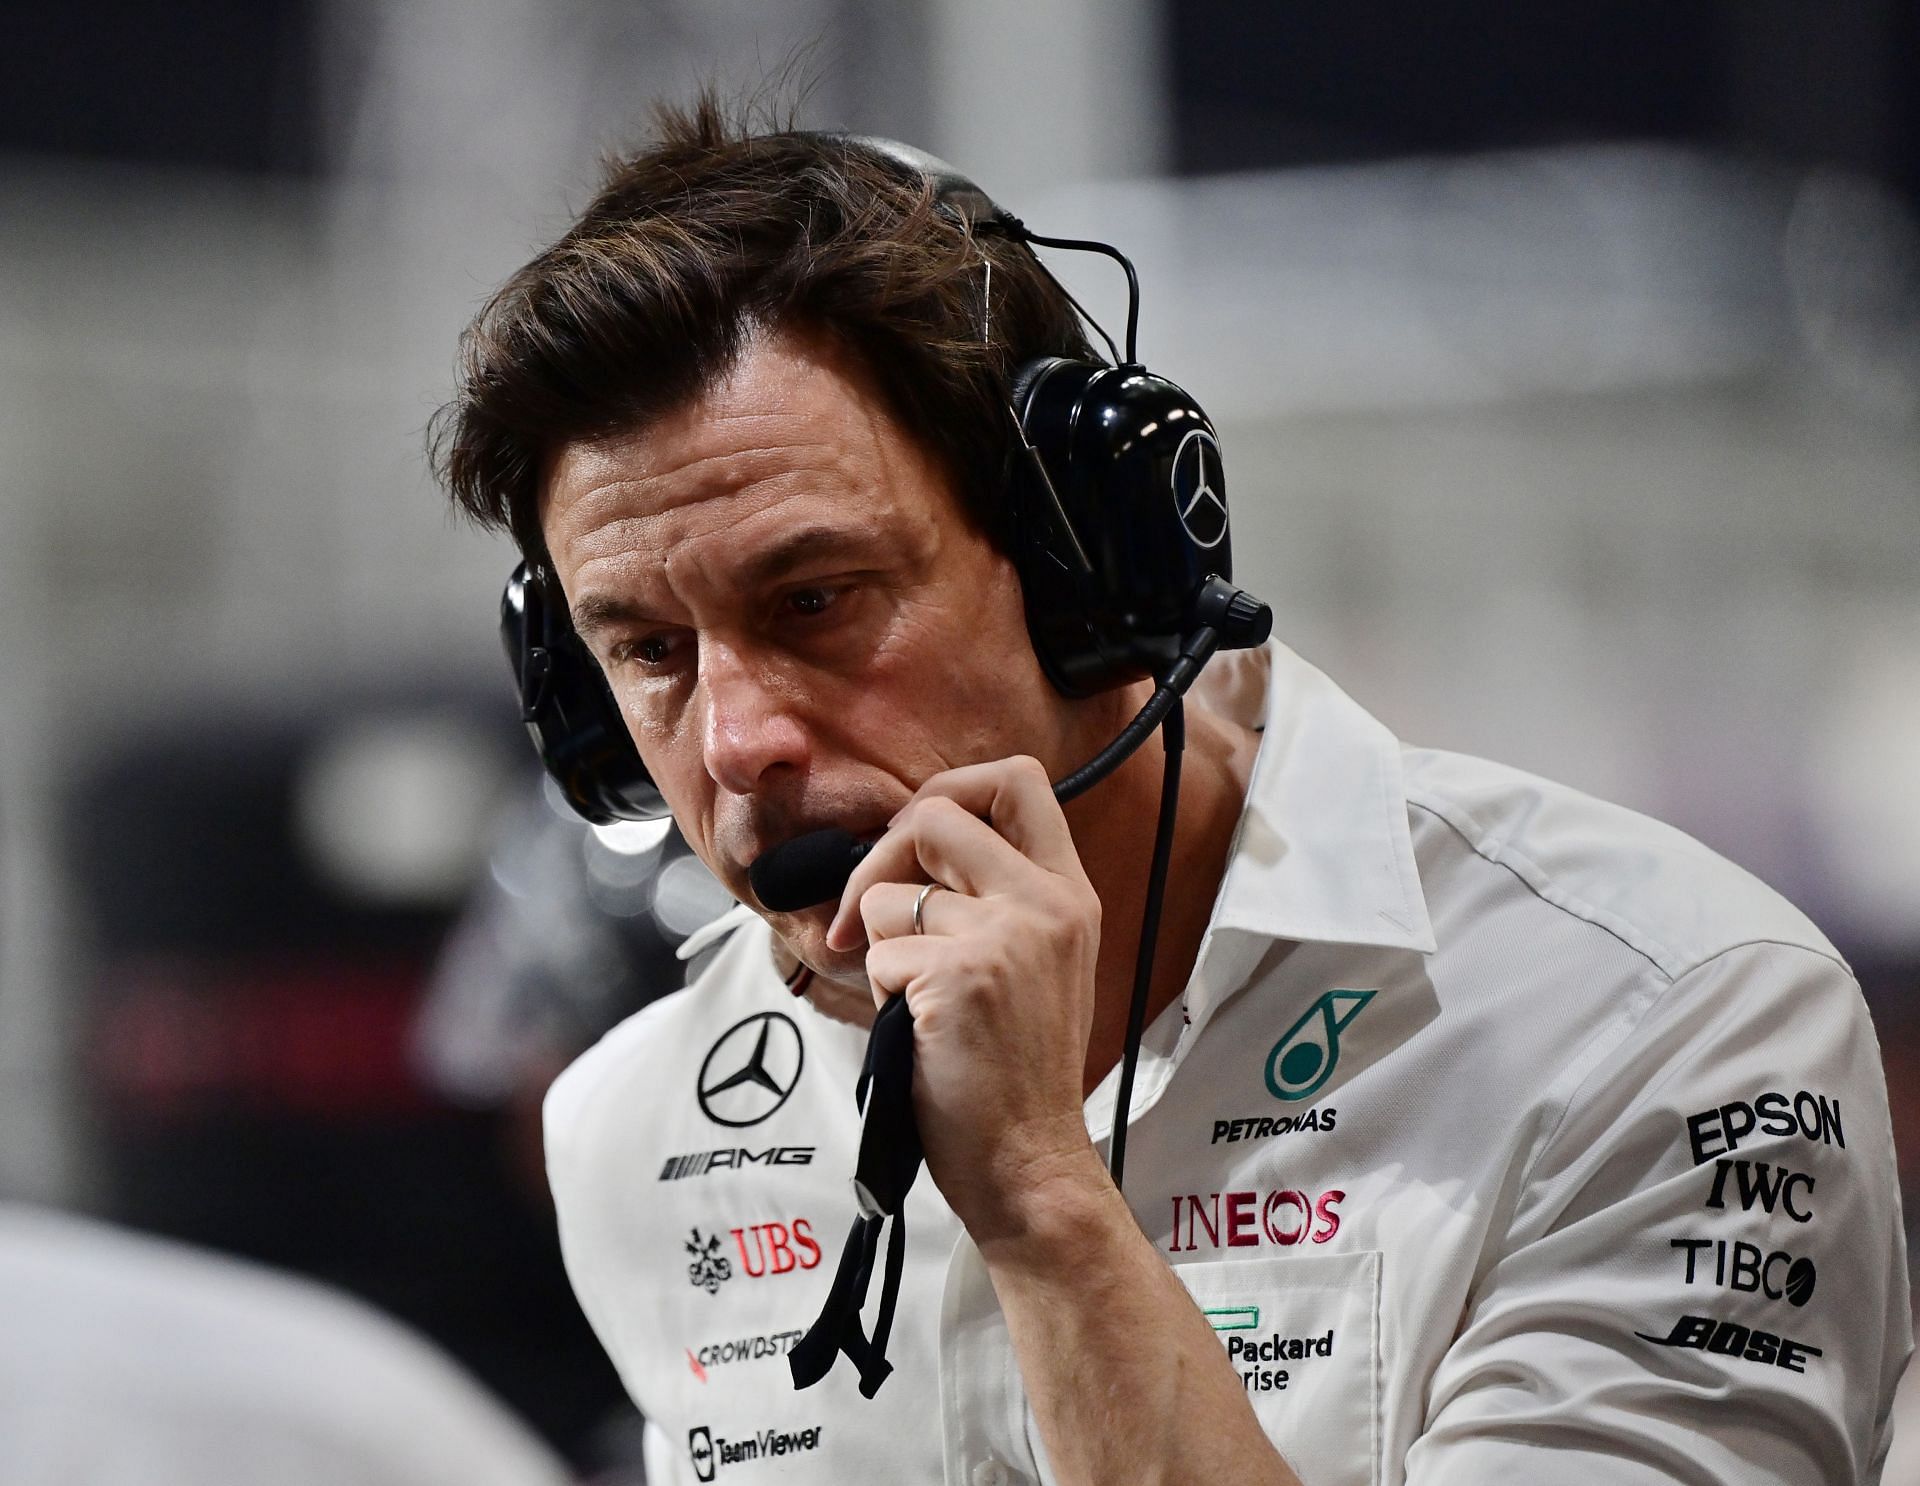 F1 Grand Prix of Saudi Arabia - Toto Wolff visibly agitated during the main race.